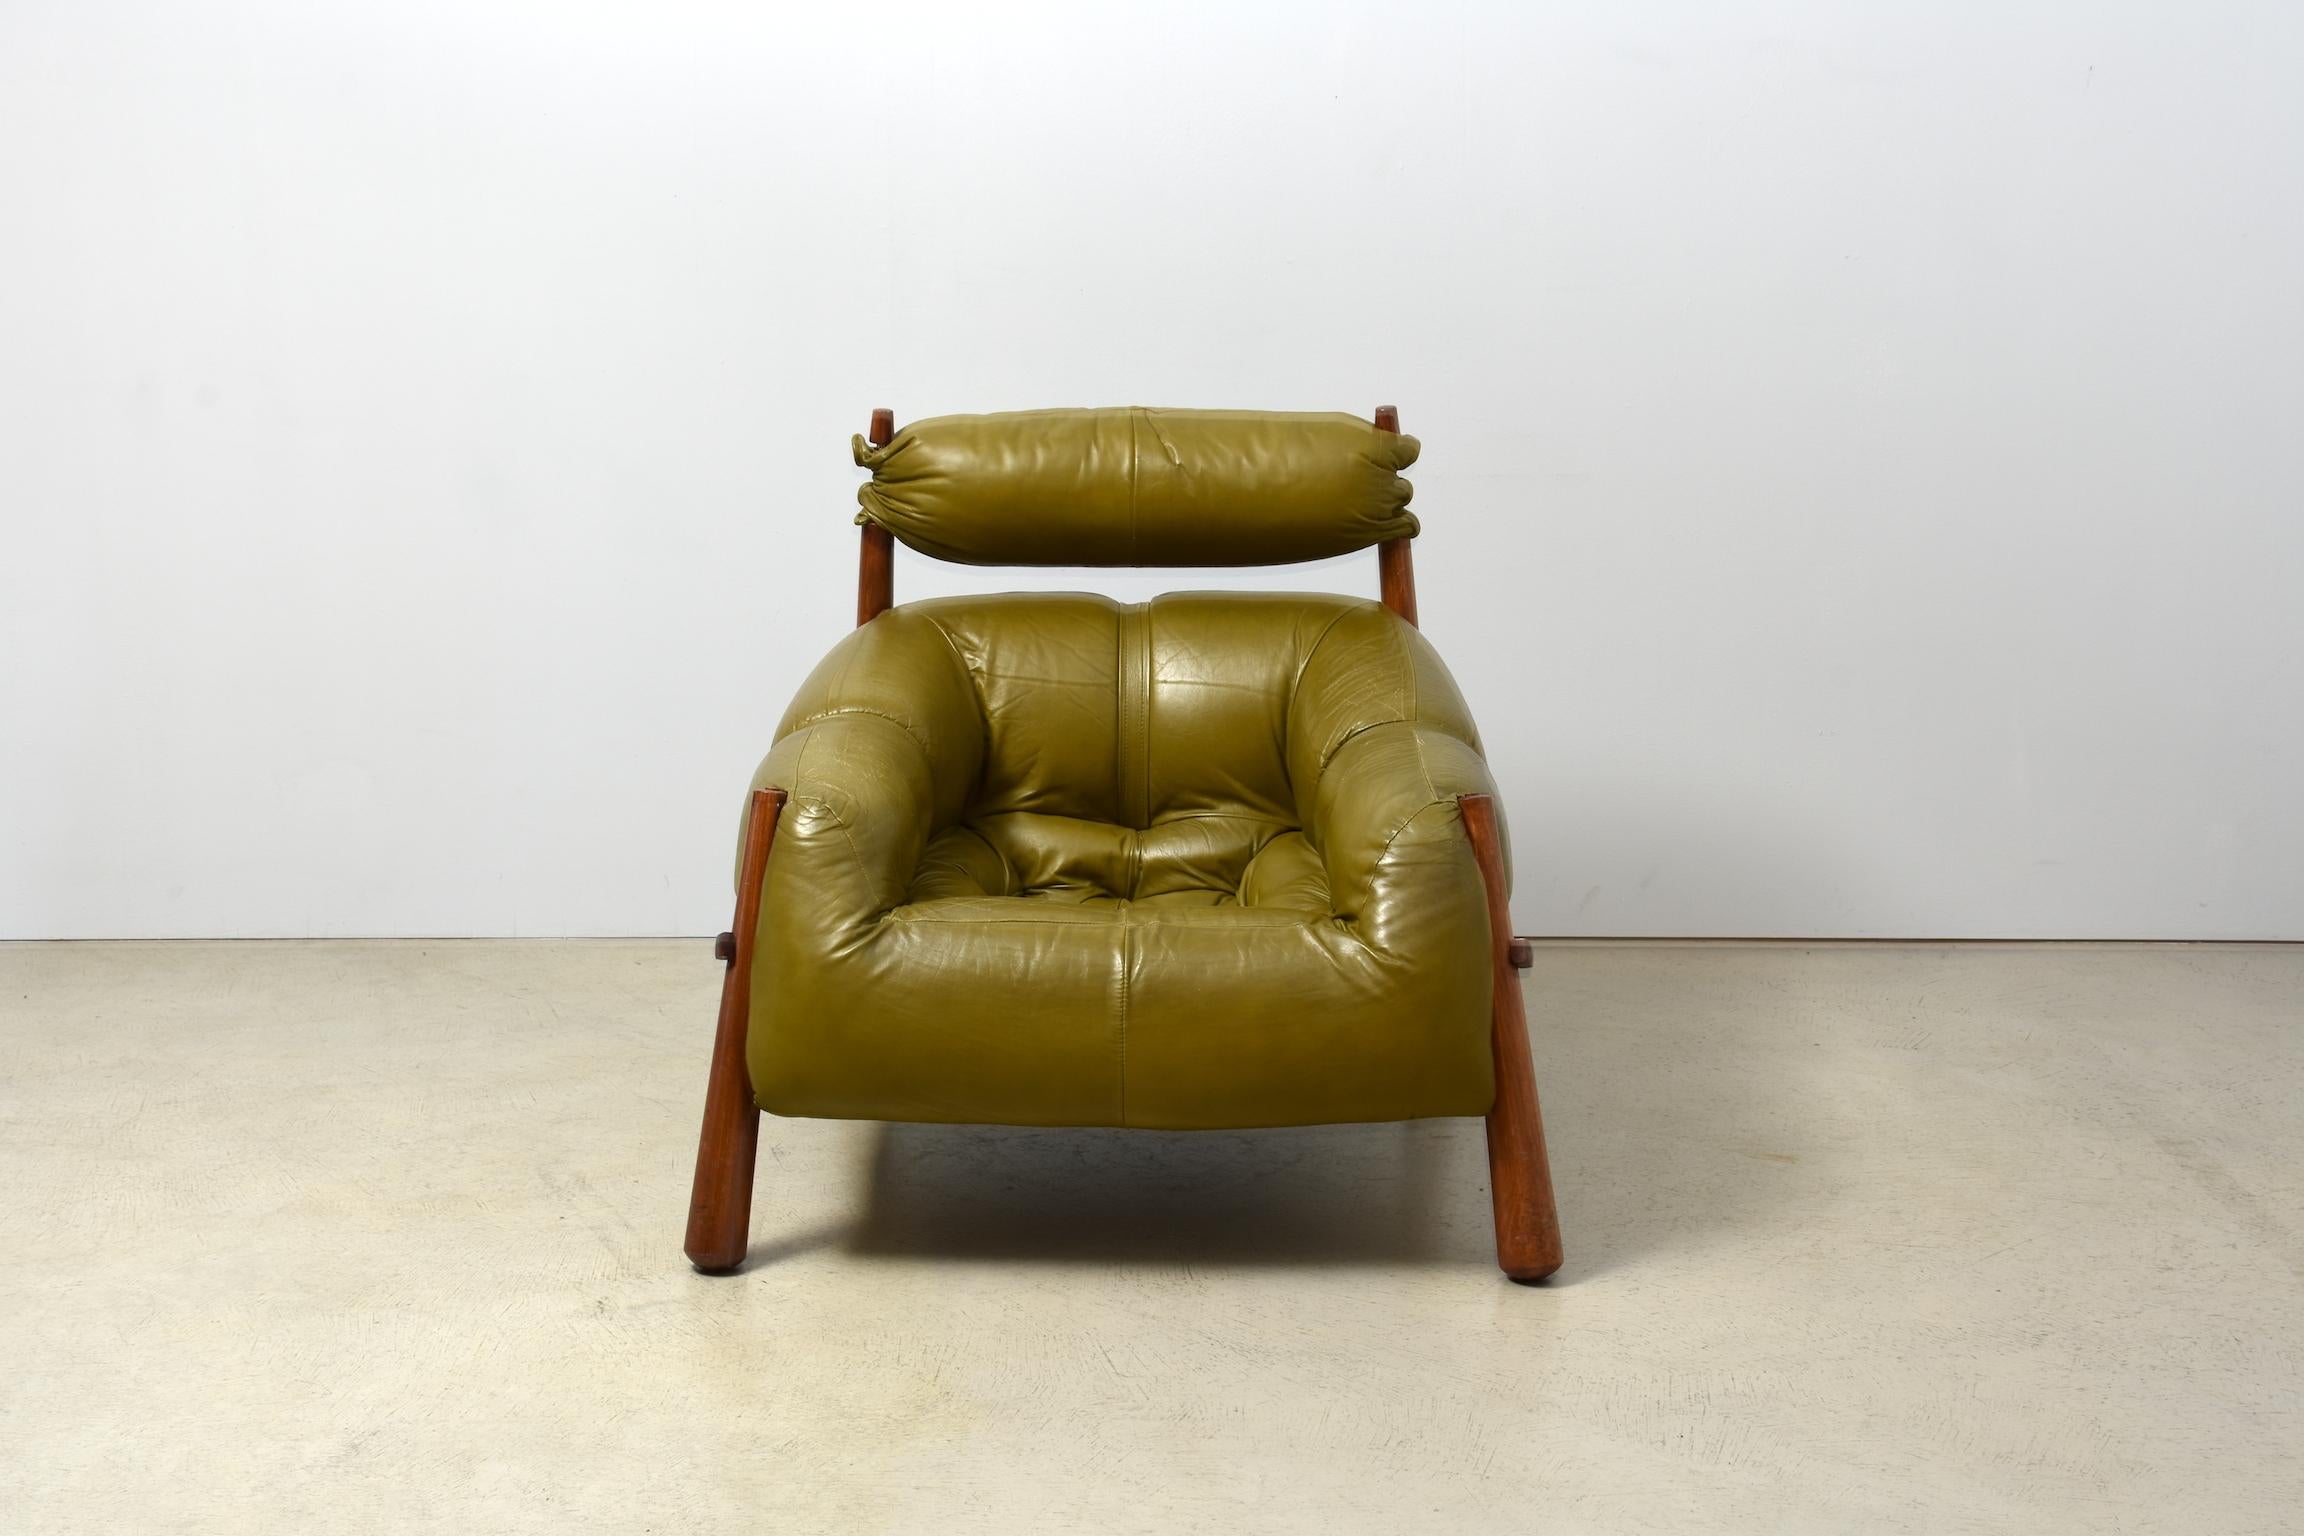 Super comfortable Brazilian lounge chair by designer Percival Lafer. Late 1950, jacaranda wood and olive green leather. The leather on the booth armrests has some minor wear. One of the jacaranda wood stick on the head rest has a minor crack.